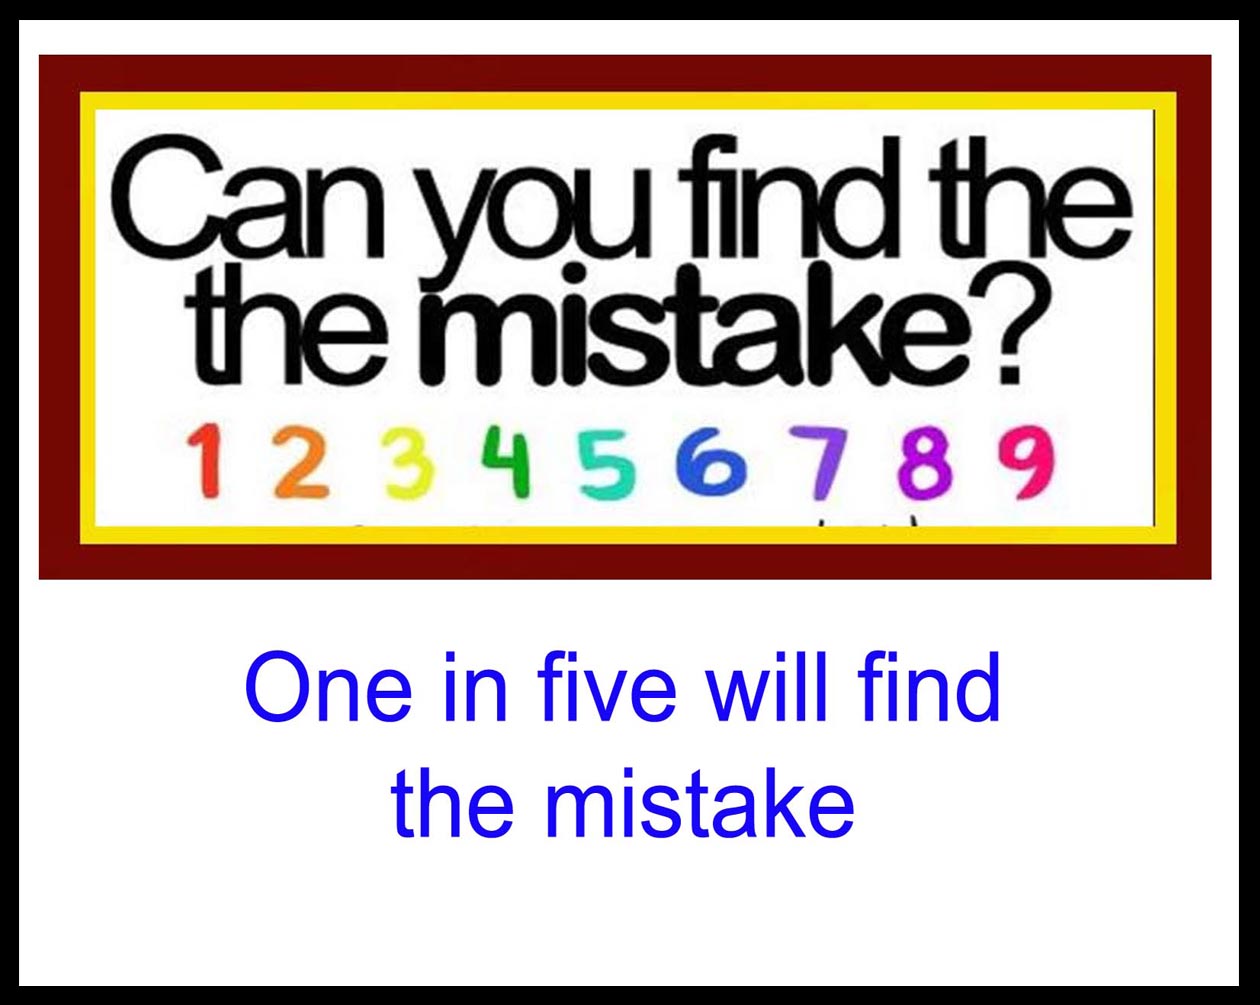 Can you finf the mistake?